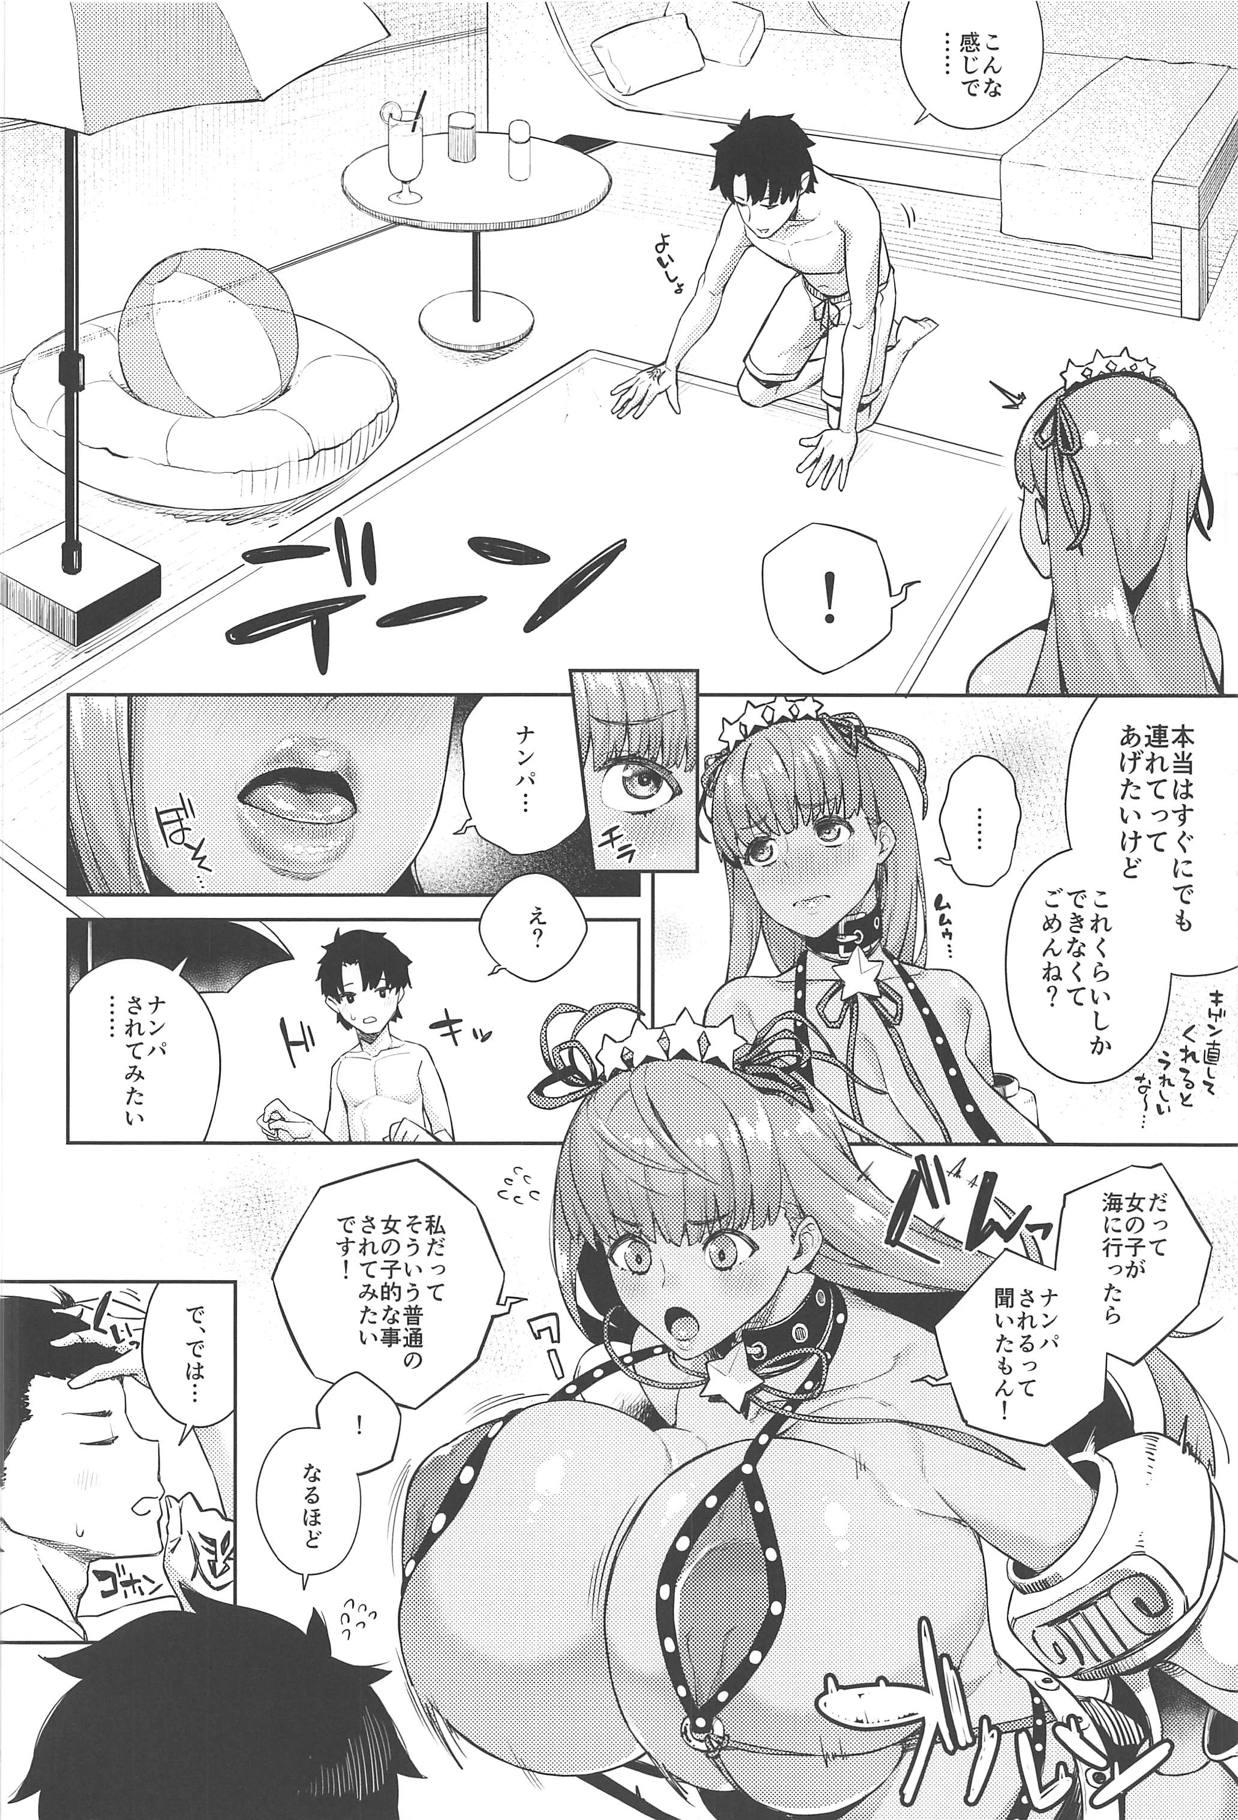 Soles Kyokou no Umibe nite - Fate grand order Longhair - Page 3